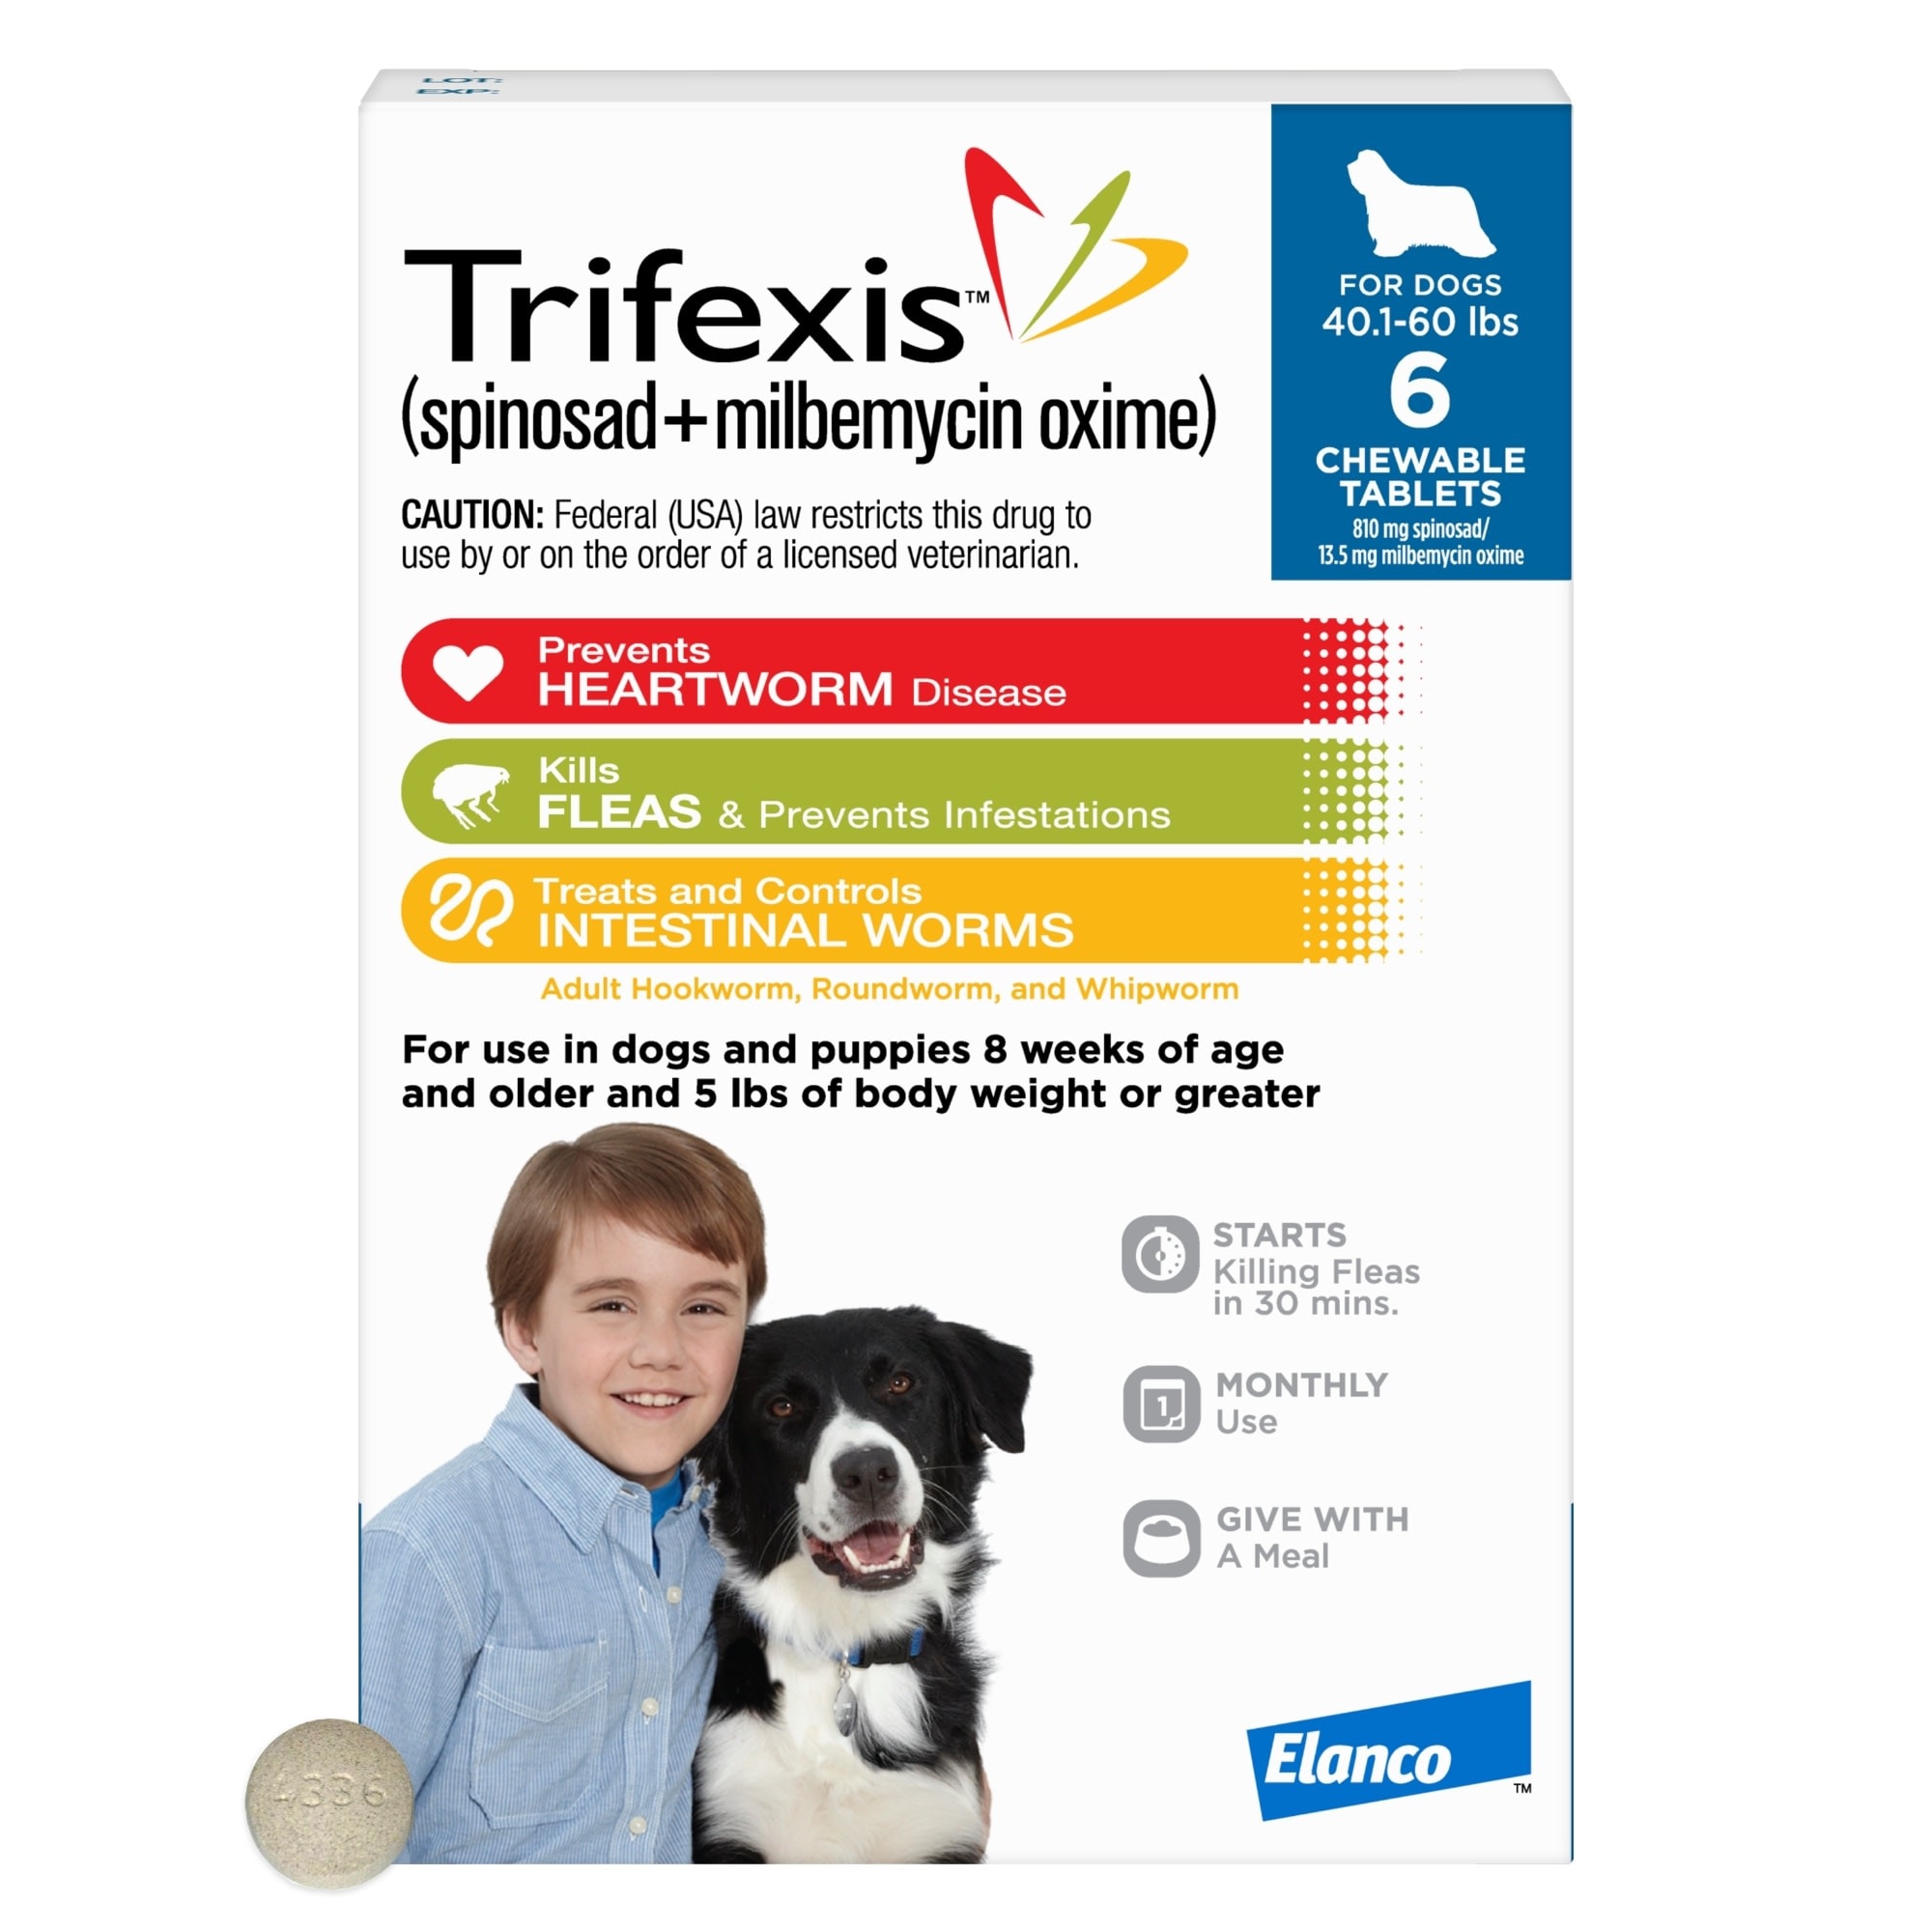 Trifexis Chewable Tablets for Dogs 40.1 to 60 lbs., 6 Pack Petco